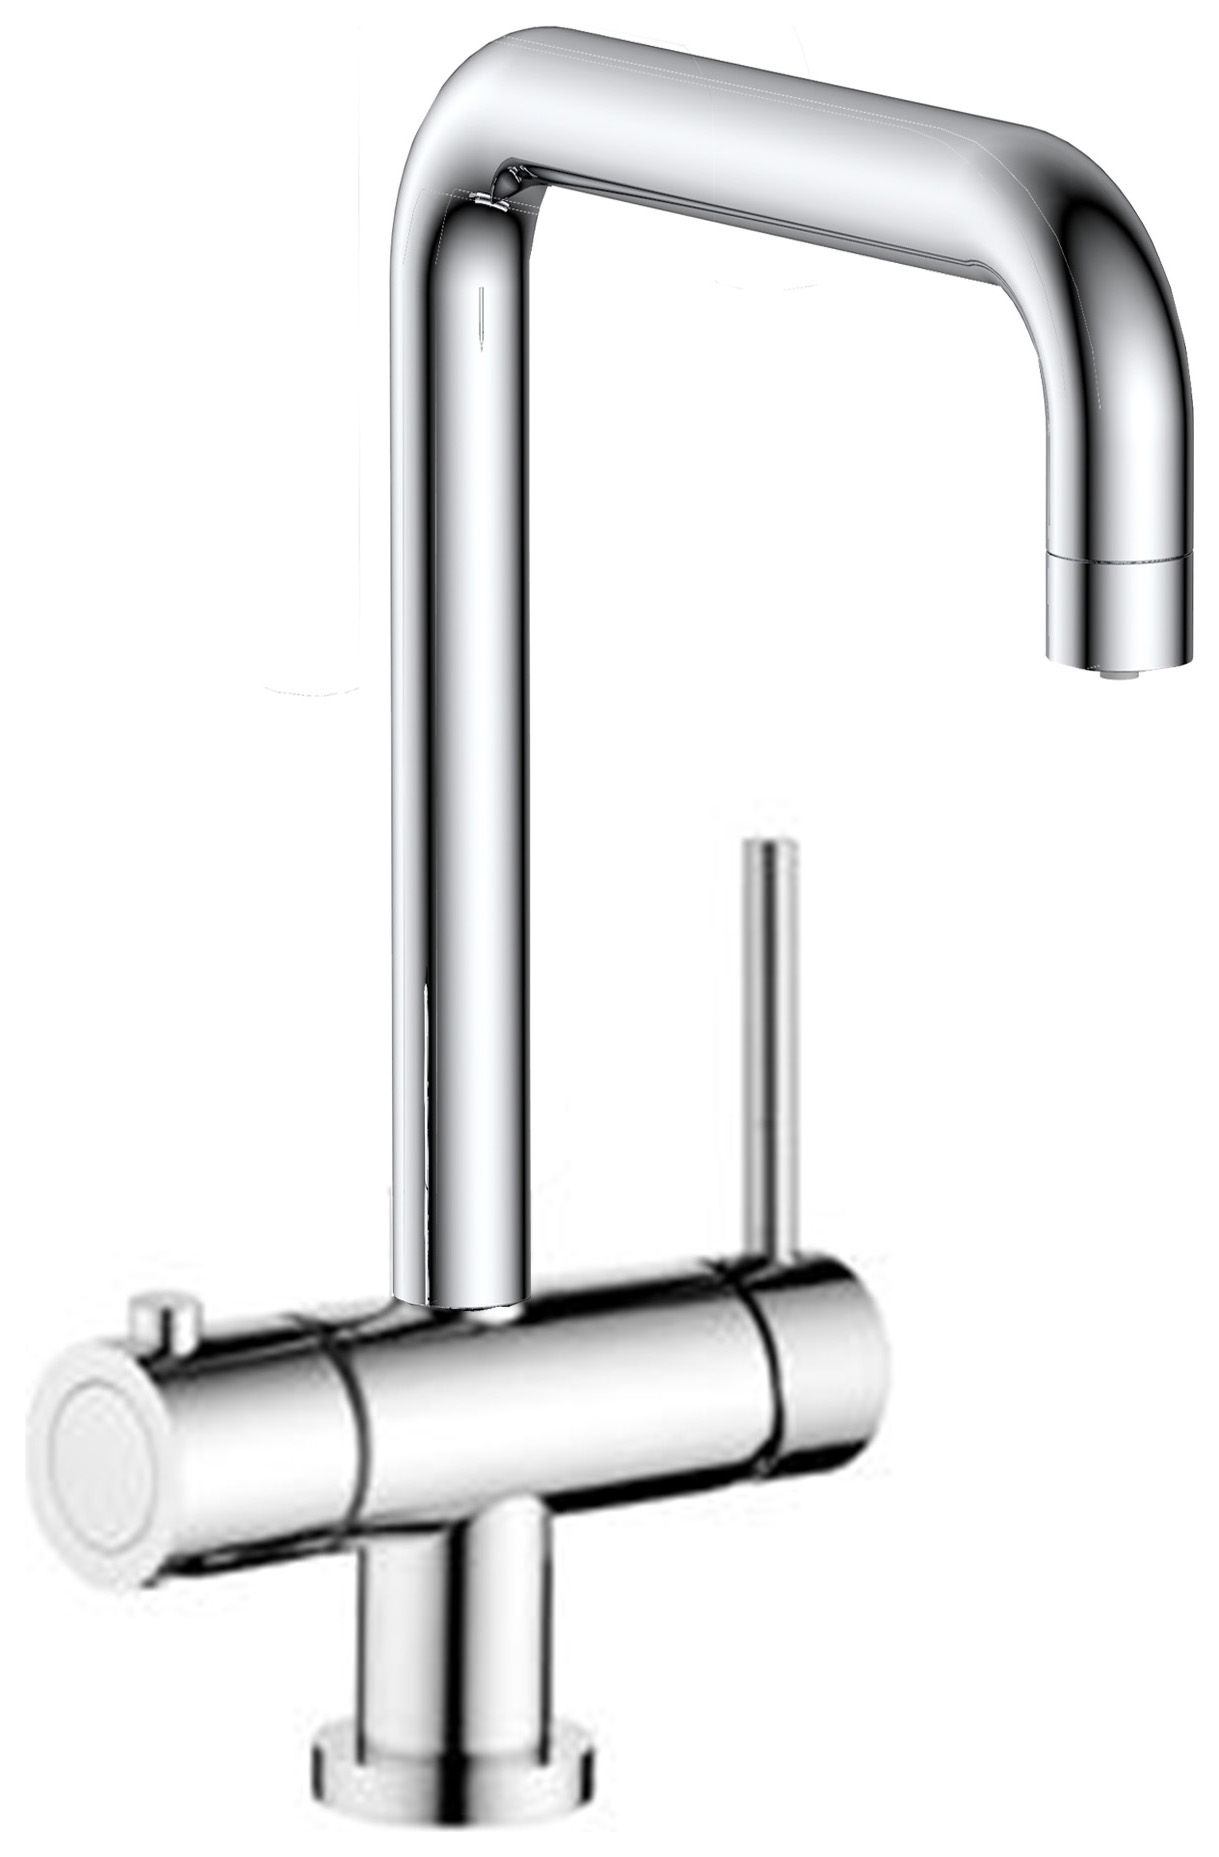 Carysil 3 in 1 square neck hot tap